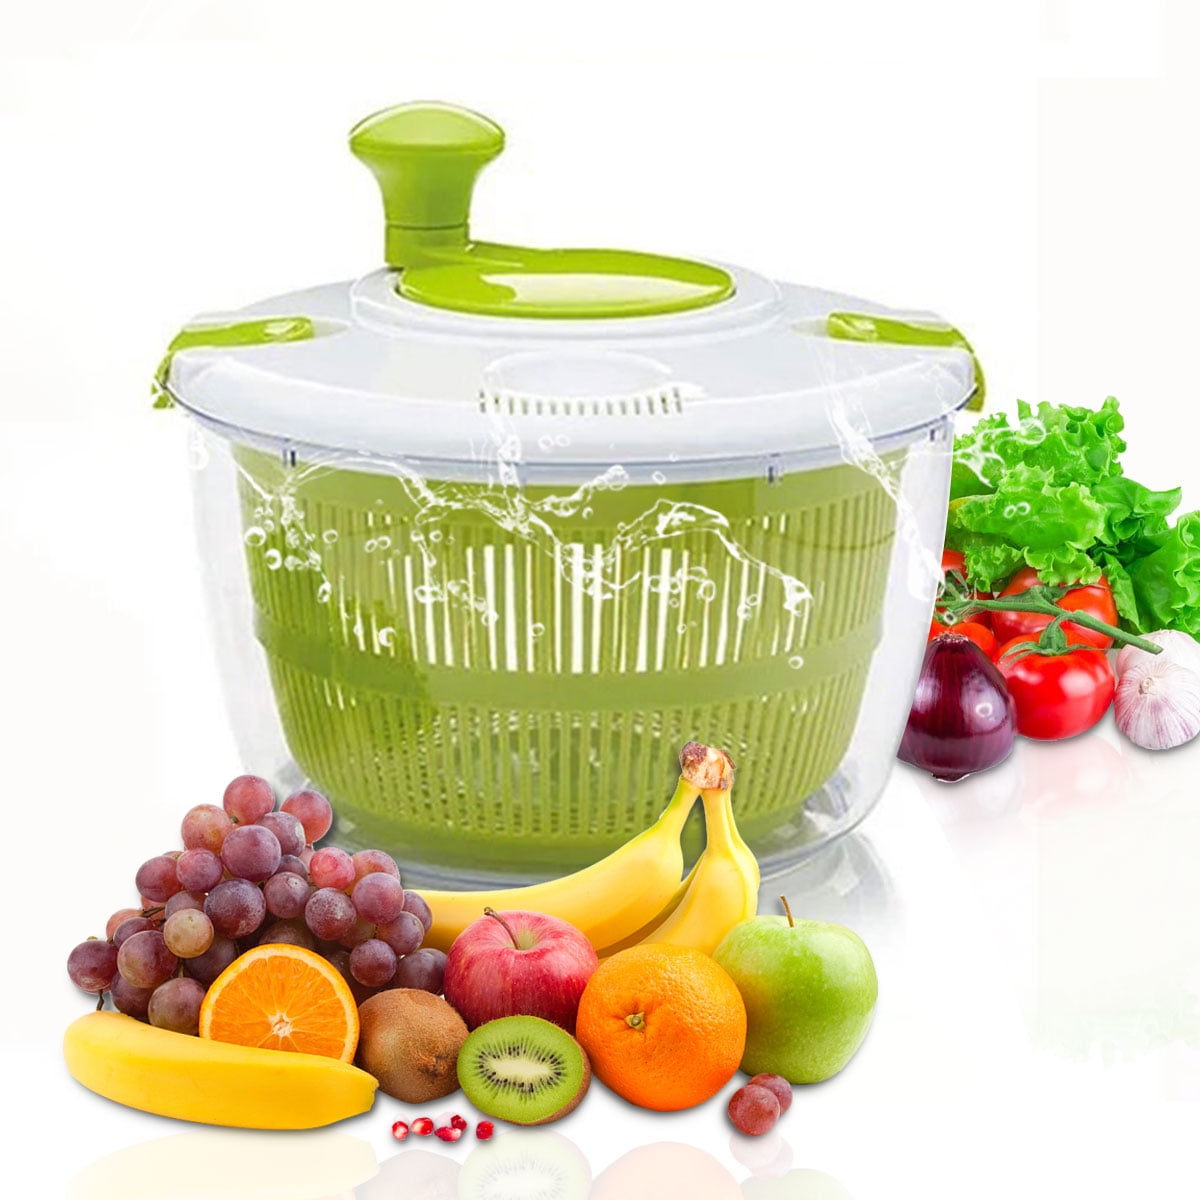 Uptyia Salad Spinner Large 5L Capacity,Fruit Cleaner Manual Lettuce Spinner  With Secure Lid Lock,Green 